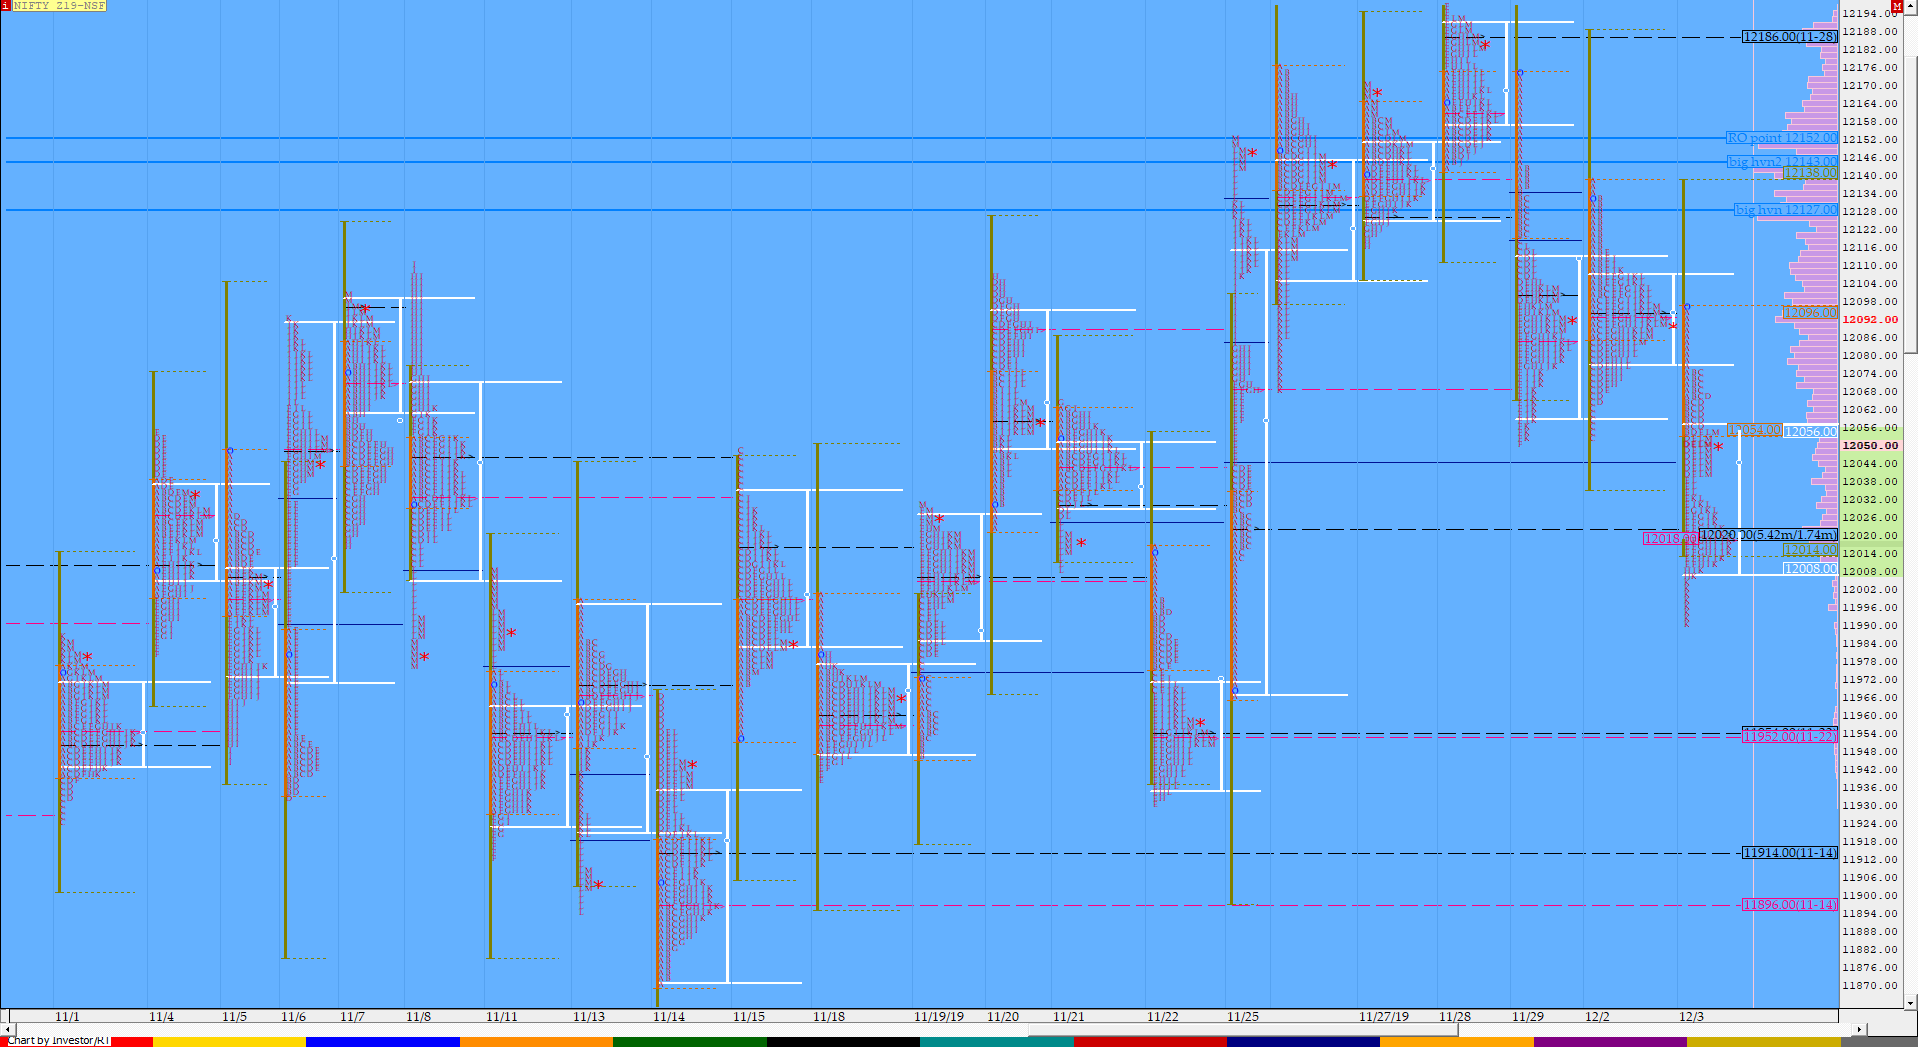 Nf Compo1 2 Market Profile Analysis Dated 03Rd December Banknifty Futures, Charts, Day Trading, Intraday Trading, Intraday Trading Strategies, Market Profile, Market Profile Trading Strategies, Nifty Futures, Order Flow Analysis, Support And Resistance, Technical Analysis, Trading Strategies, Volume Profile Trading